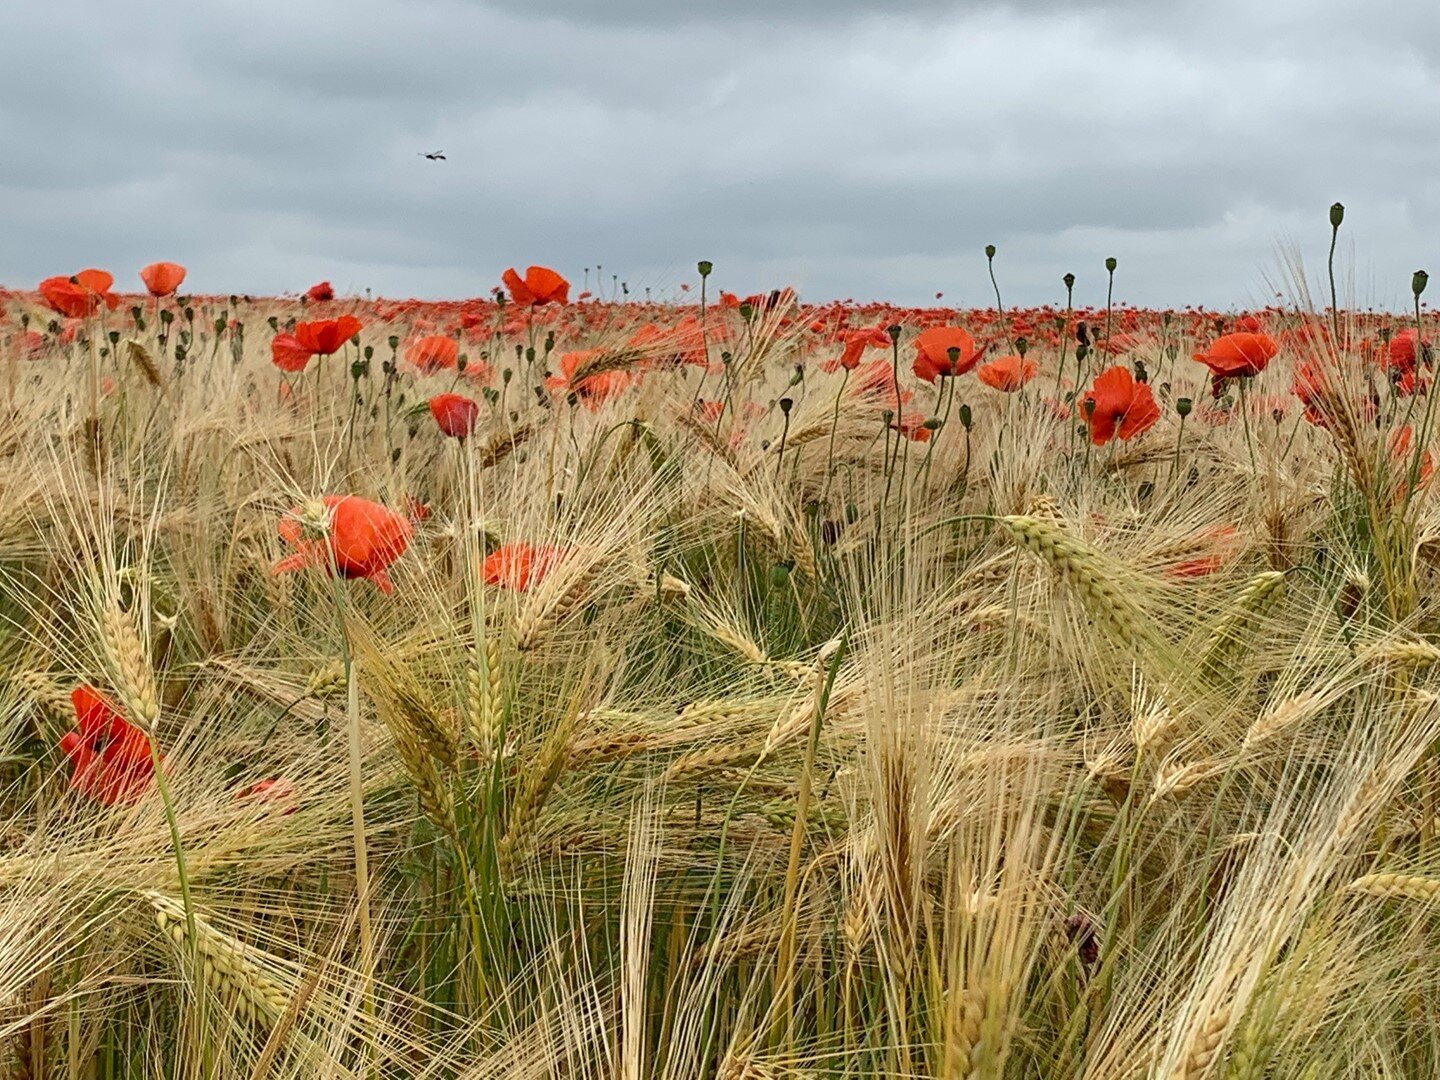 Norfolk poppies - totally spectacular ❤️

#norfolk #norfolkpheasant #wildflowers #poppies #norfolkpoppies #bespokeexperiences #bespoketravelexperiences #norfolkwalks #countrystays